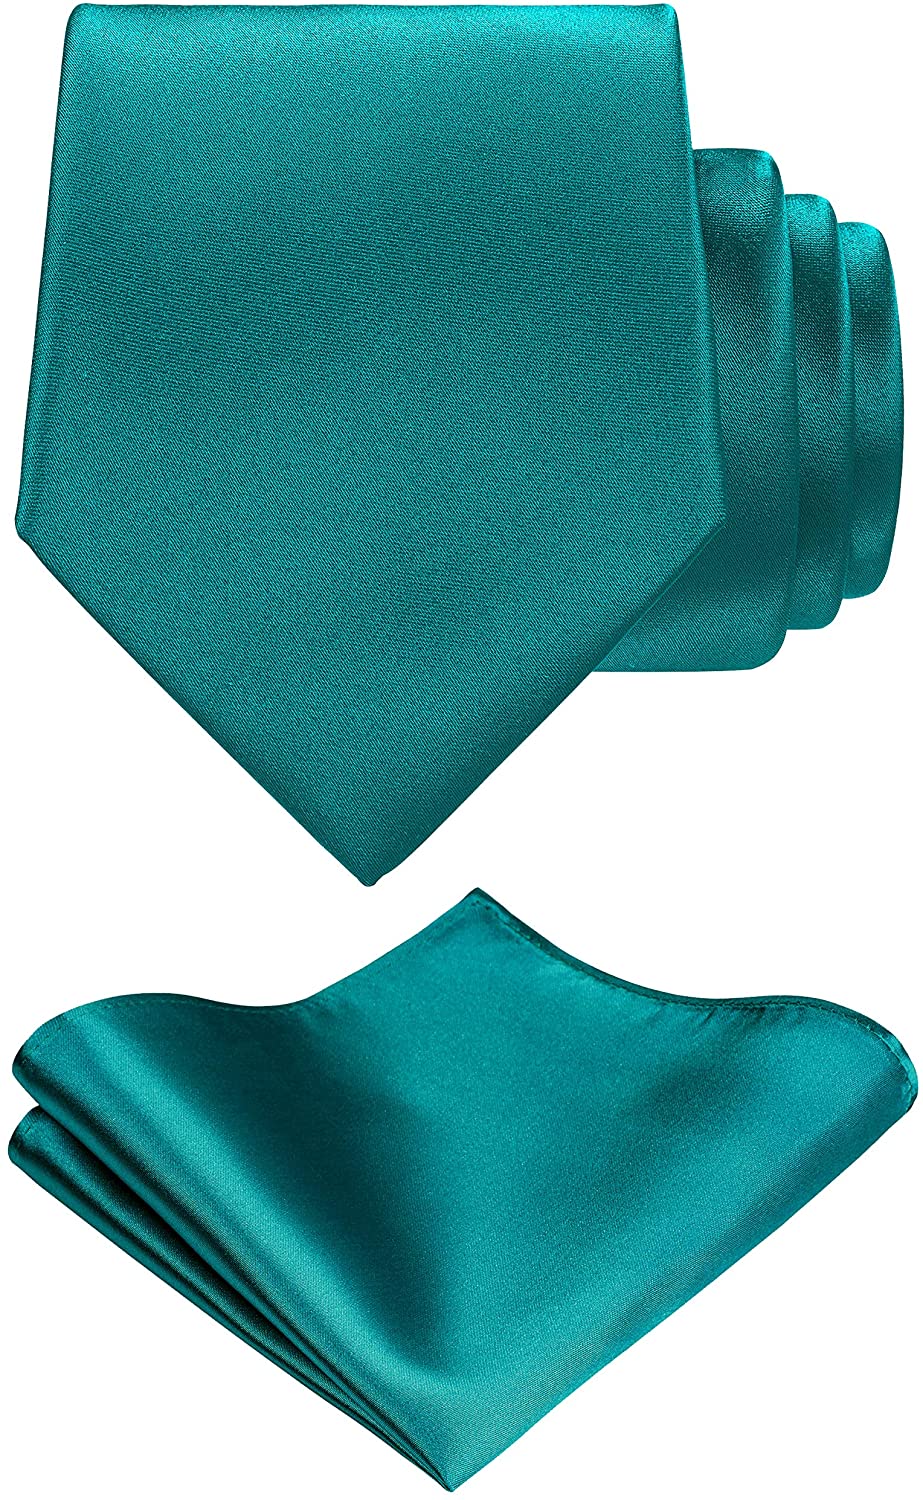 TIE G Solid Satin Color Formal Necktie and Pocket Square Sets in Gift Box 